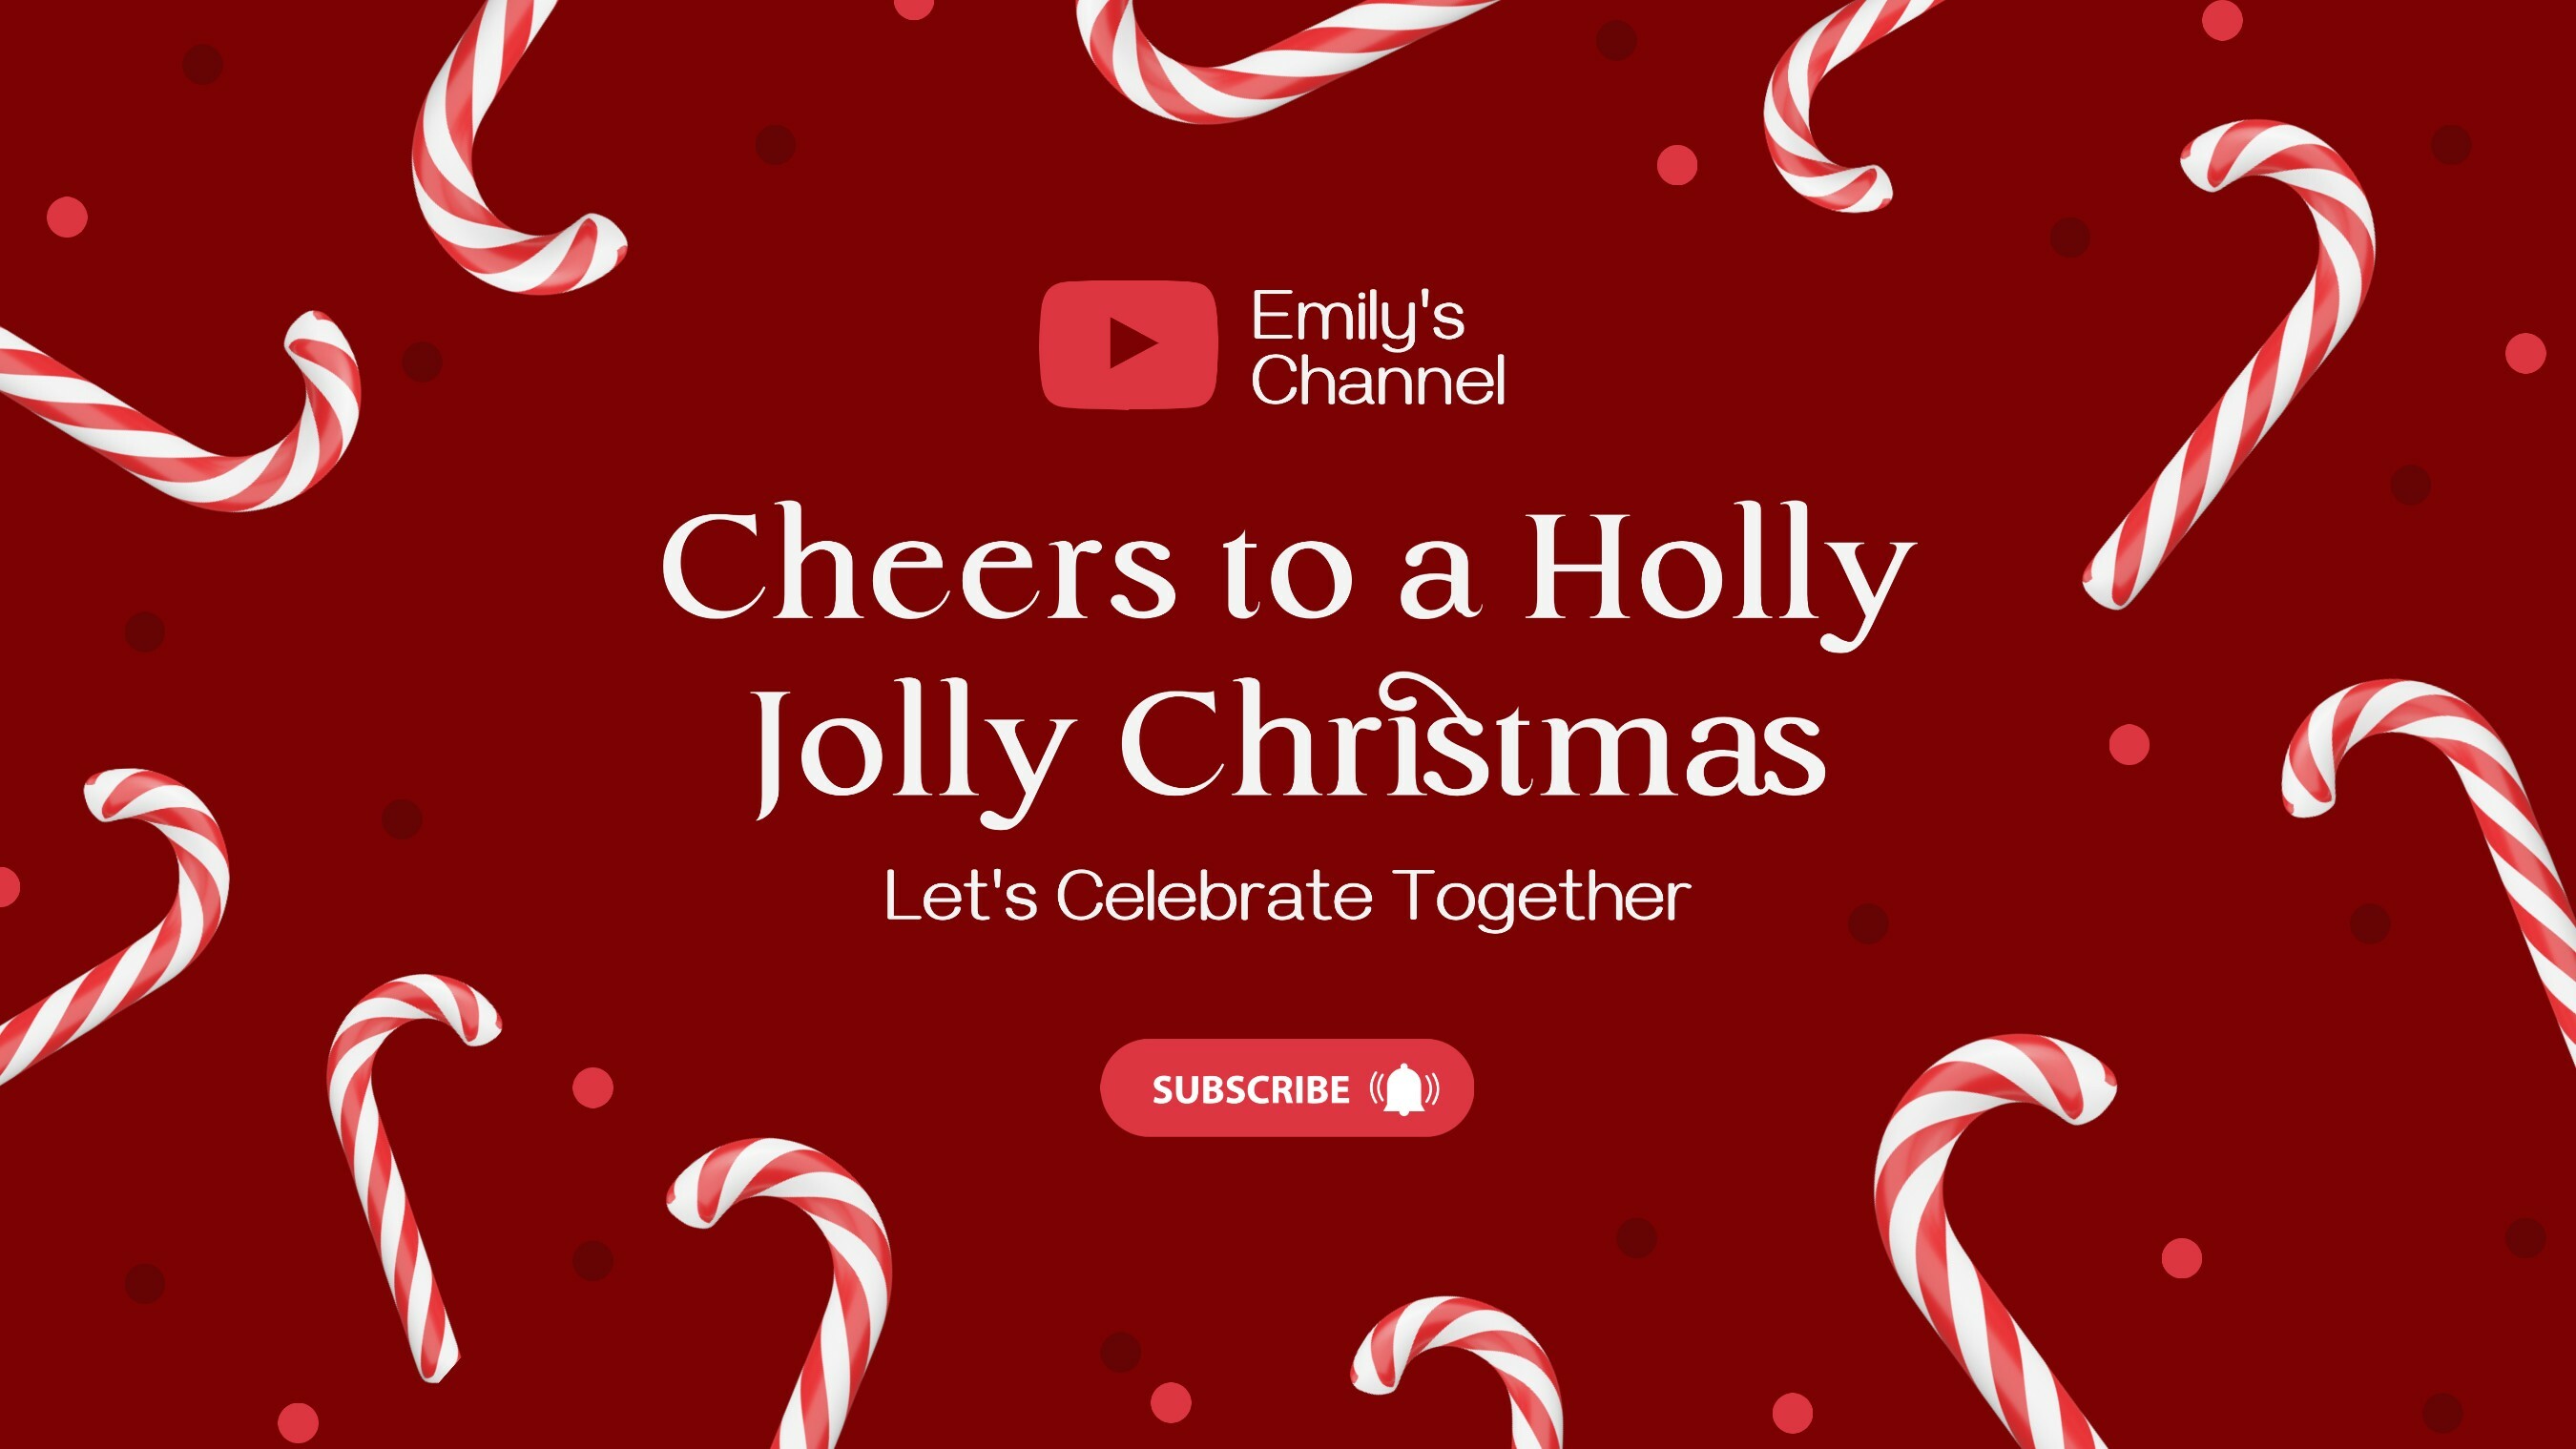 Candy Canes Christmas Greeting Youtube Banner